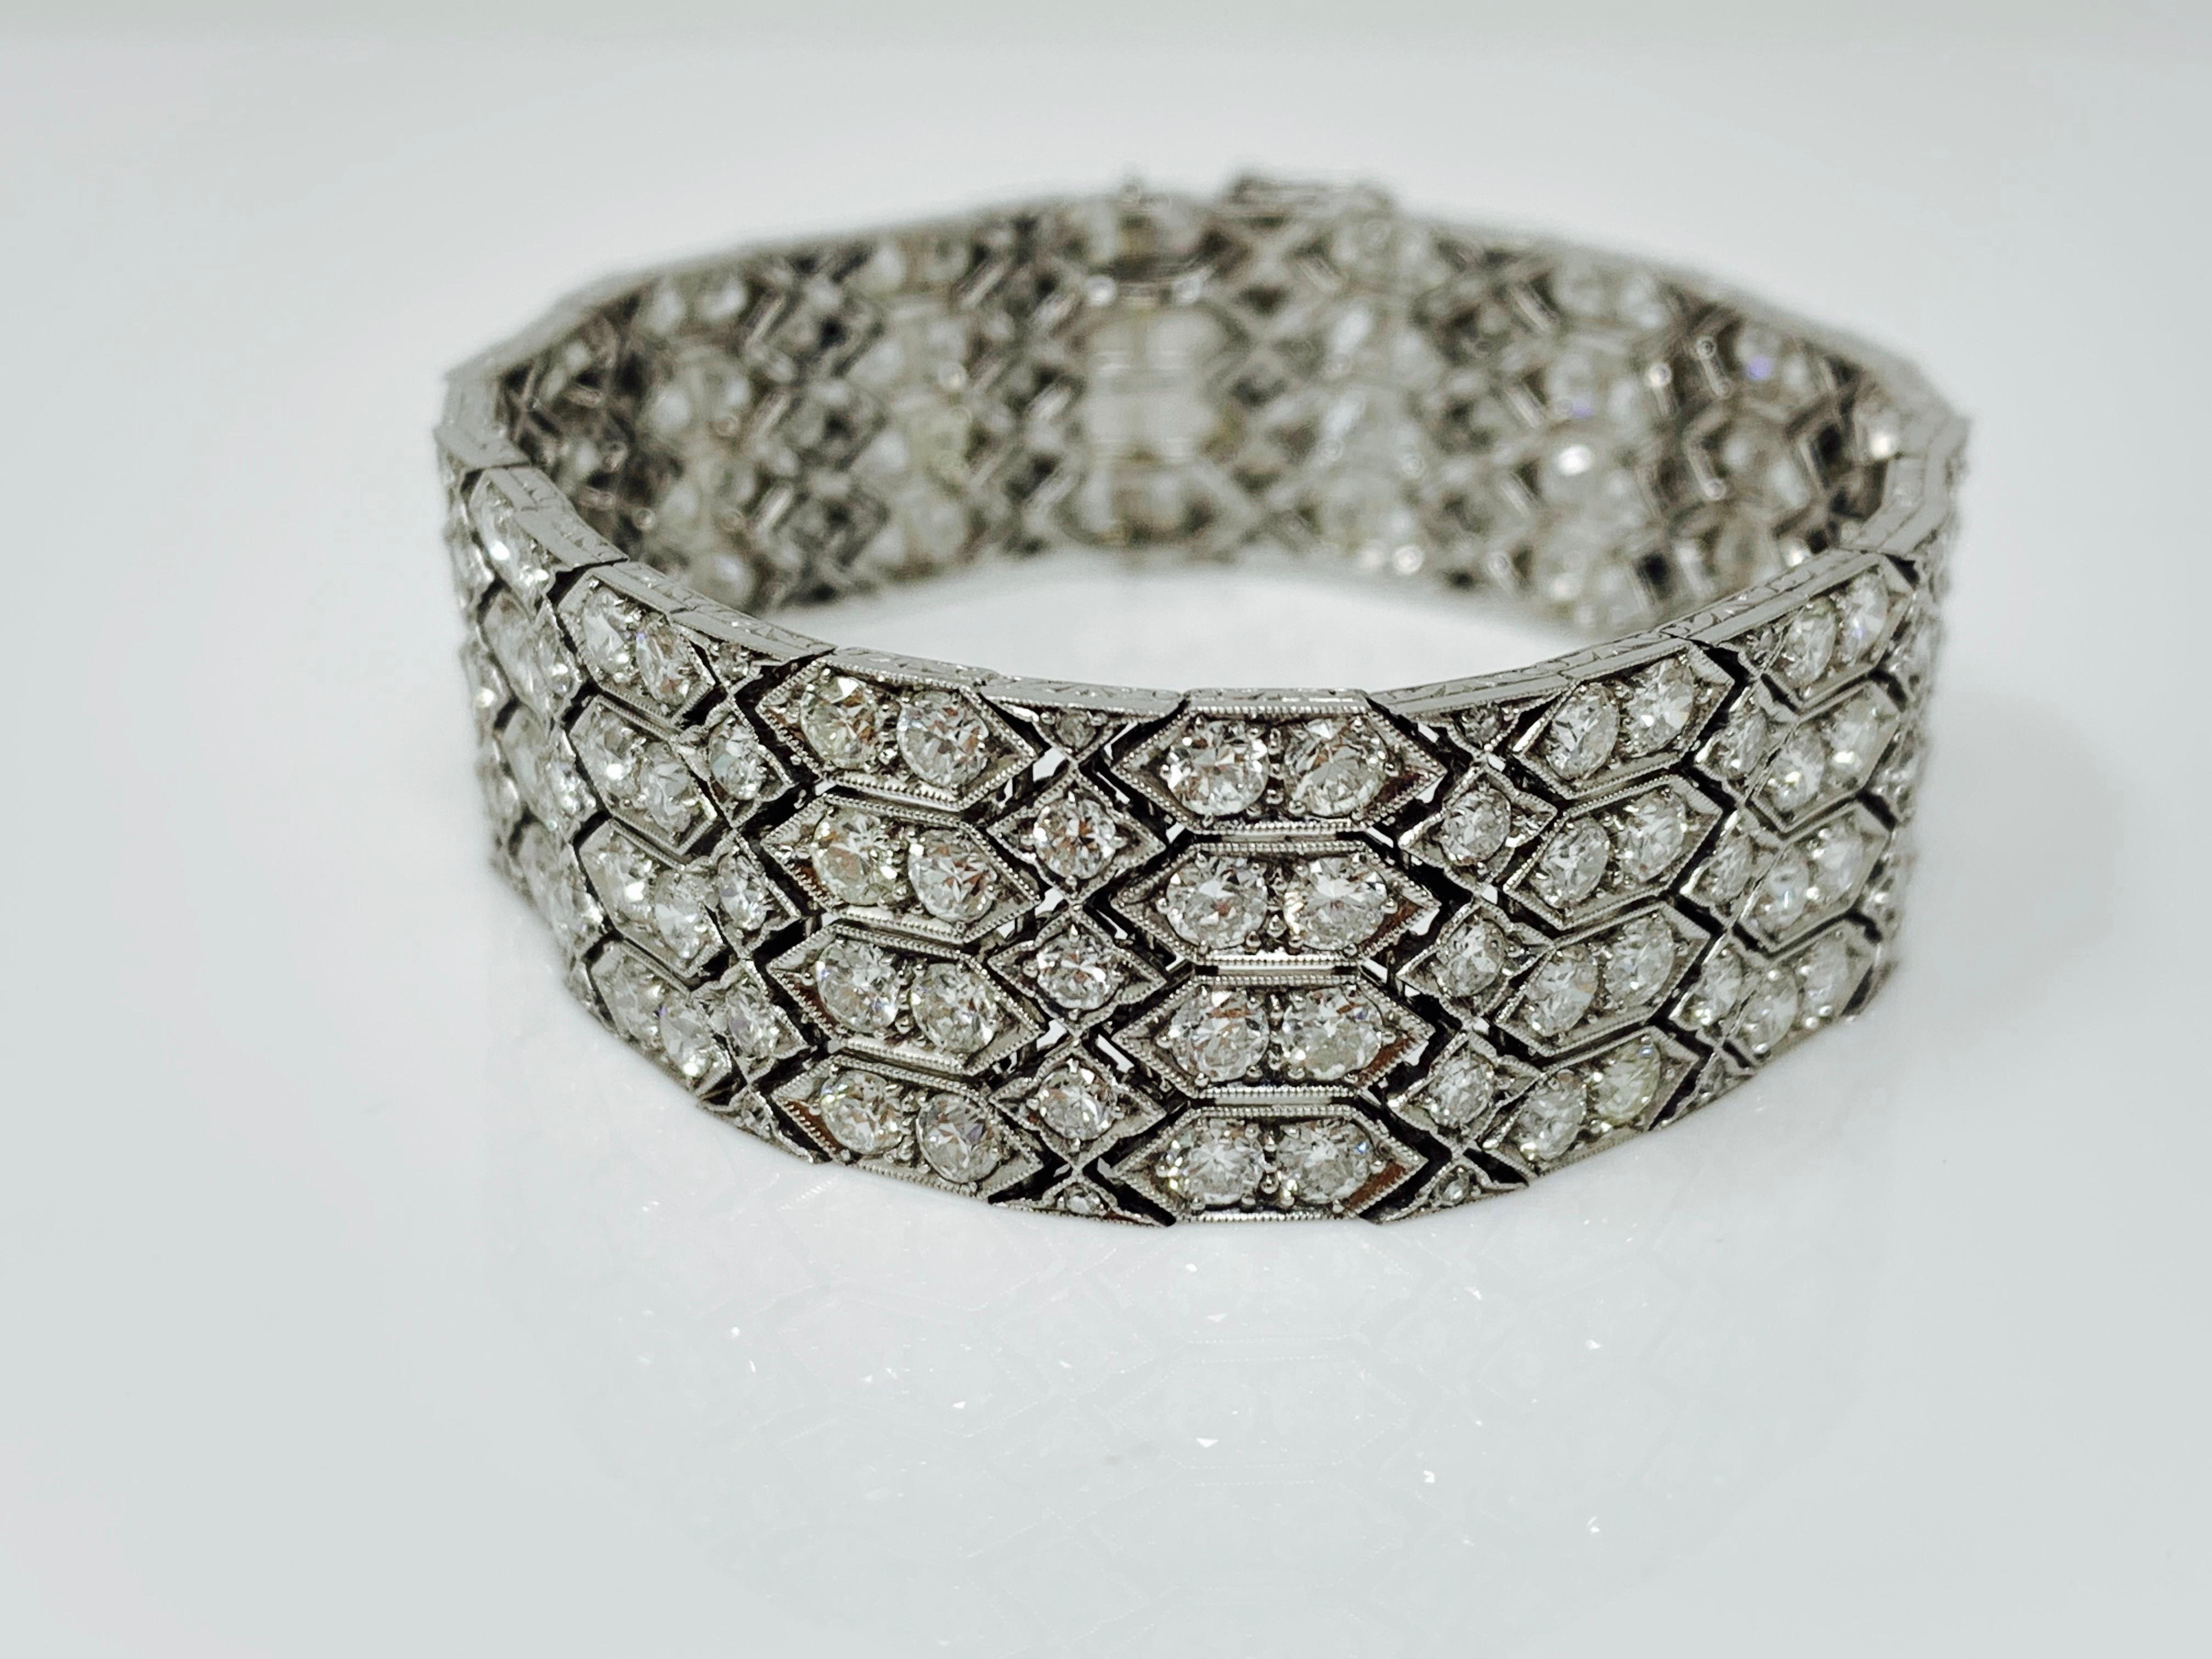 This Antique fabulous one of a kind white diamond wide bracelet is handmade and is from 1920's. 
Diamond weight : 24 carat with GH color and VS - SI clarity. 
Measurements : 7 inches long and .75 inch wide. 

